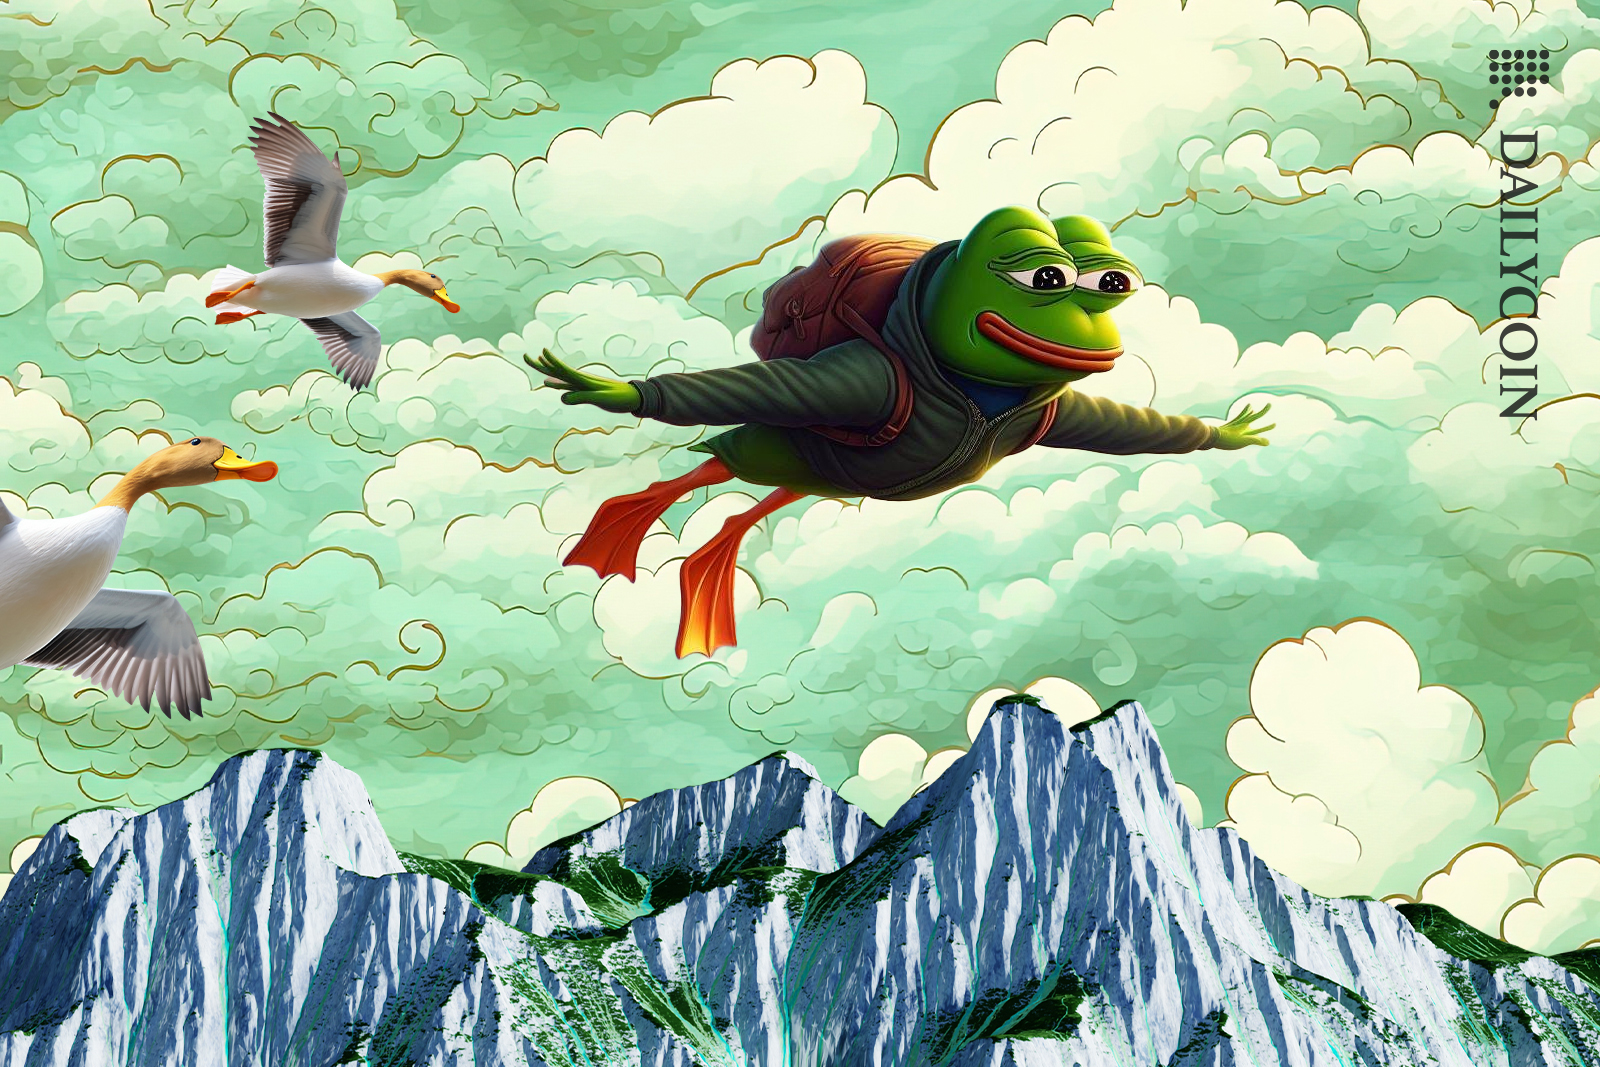 PEPE soaring through the air above mountain peaks.